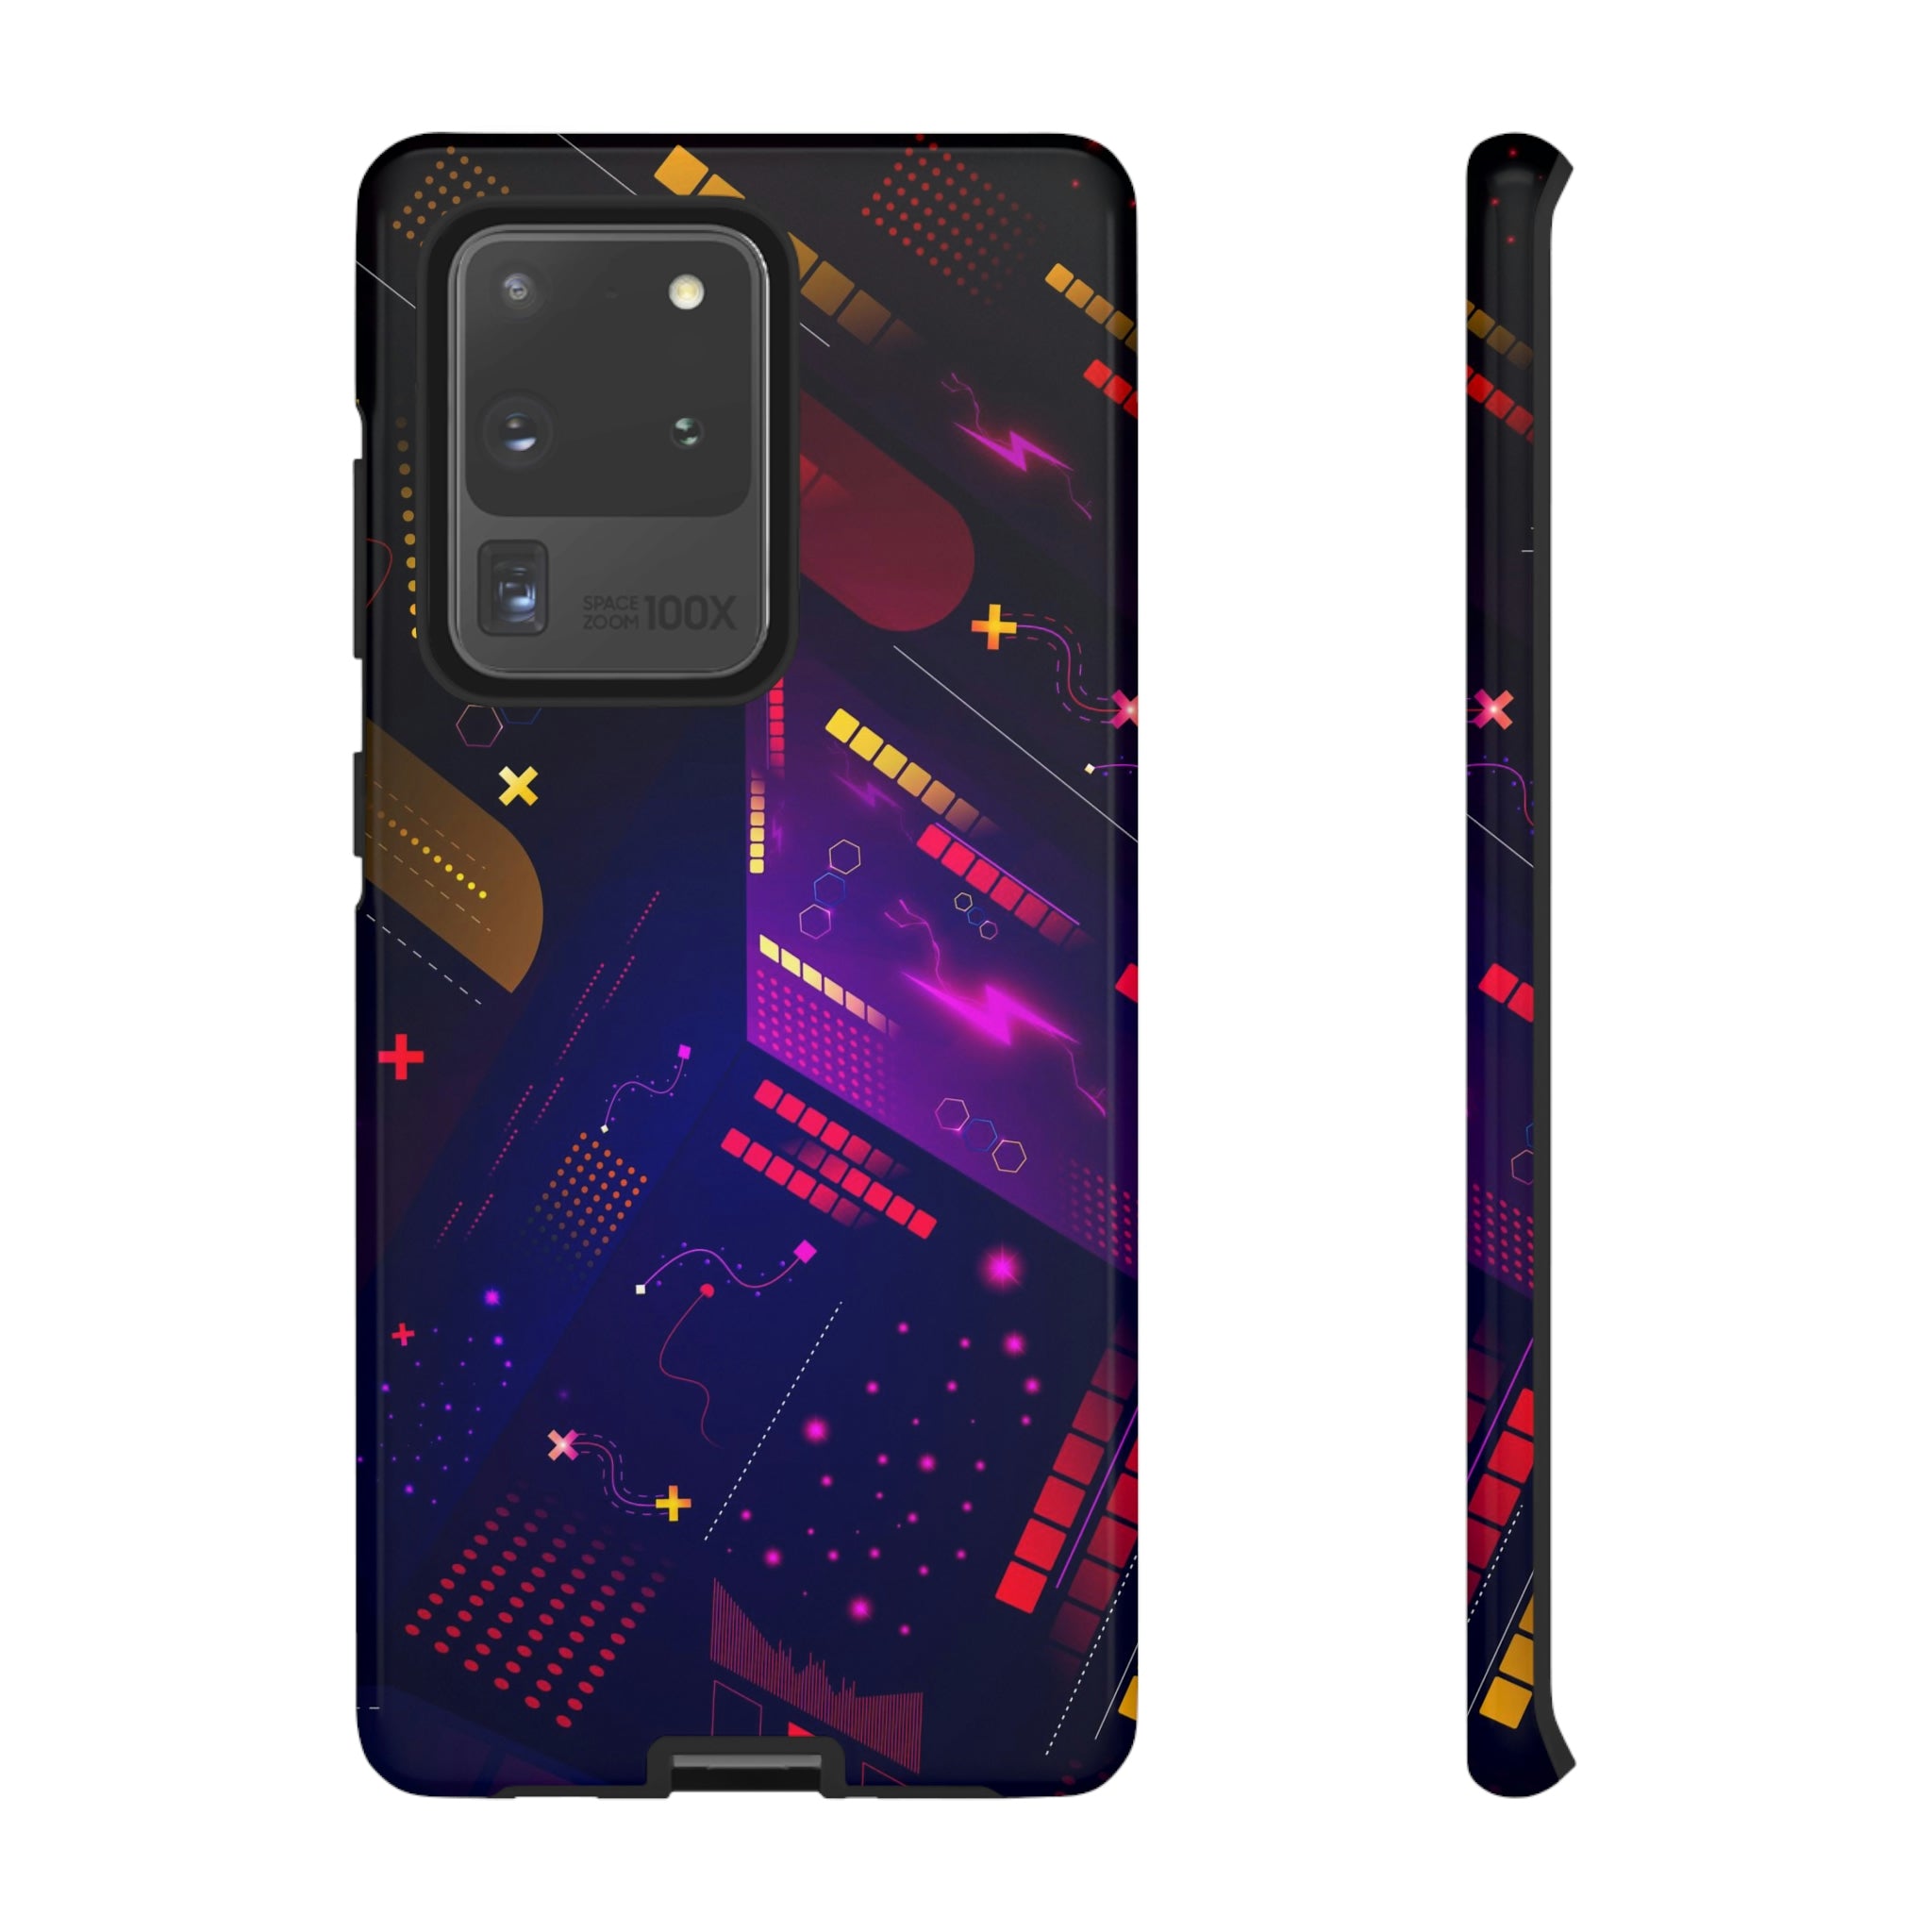 High Voltage - Dual Layered, Full Body, Armored Phone Case for iPhone 13/Samsung Galaxy S22/Google Pixel 6Smartphone CasesStreamLiteStreamLite